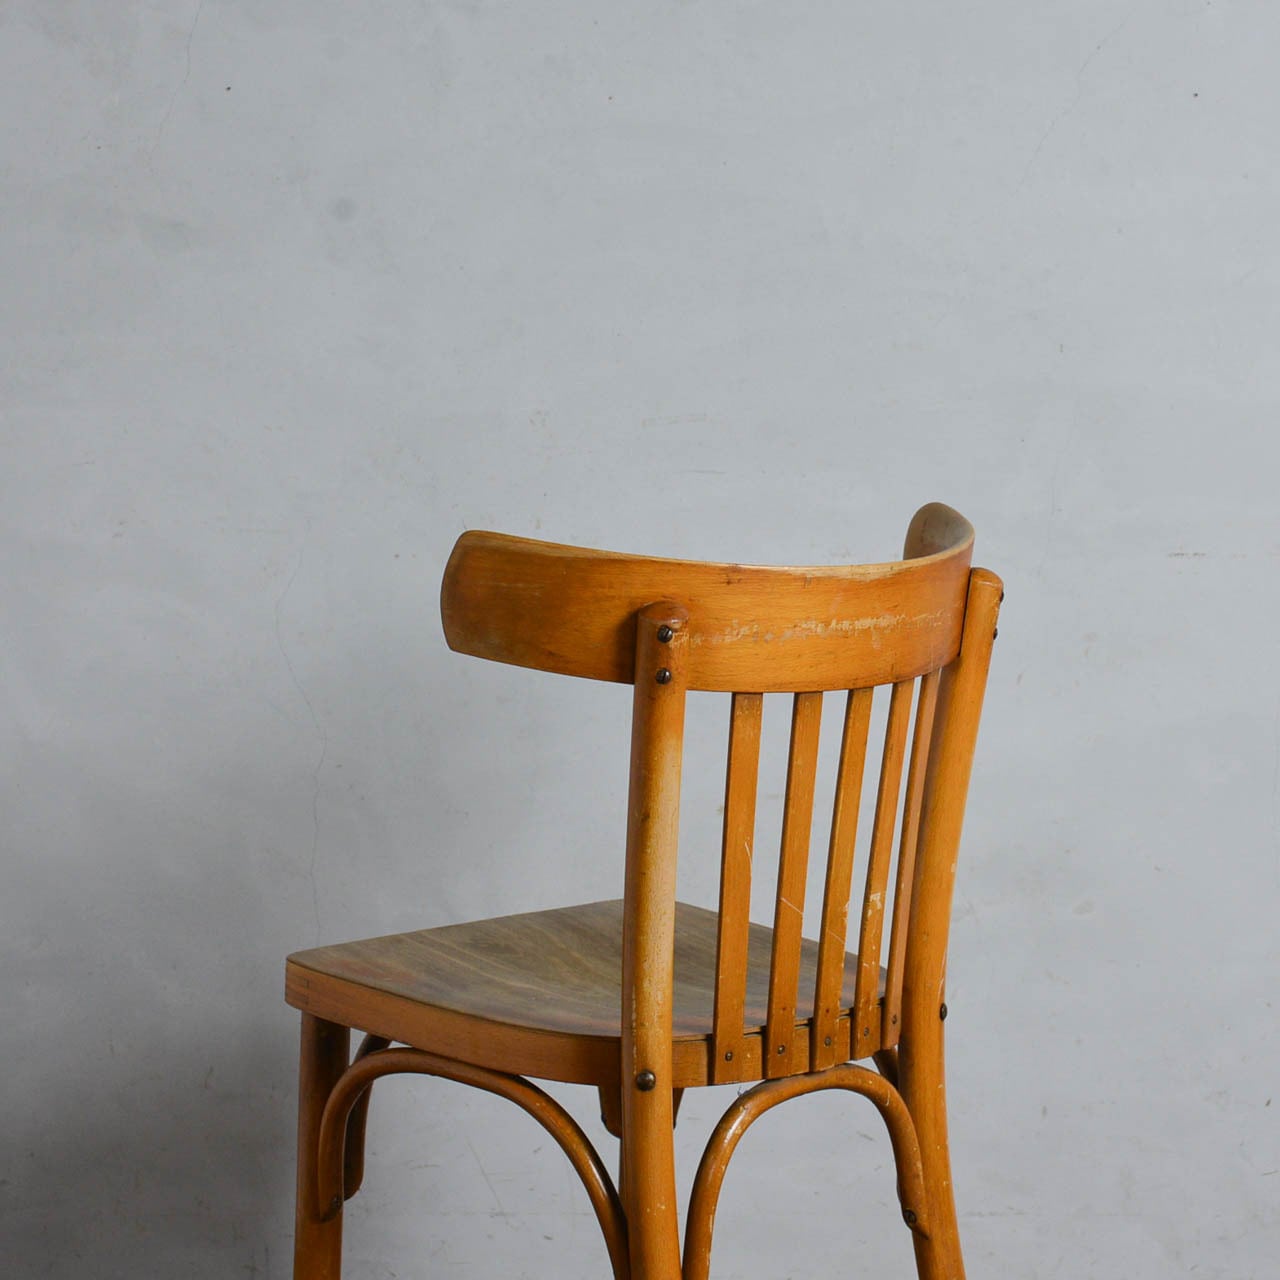 Cafe Bentwood Chair / カフェベントウッドチェア〈椅子・カフェチェア・ダイニングチェア・トーネット・アンティーク・ヴィンテージ〉  112357 | SHABBY'S MARKETPLACE　アンティーク・ヴィンテージ 家具や雑貨のお店 powered by BASE